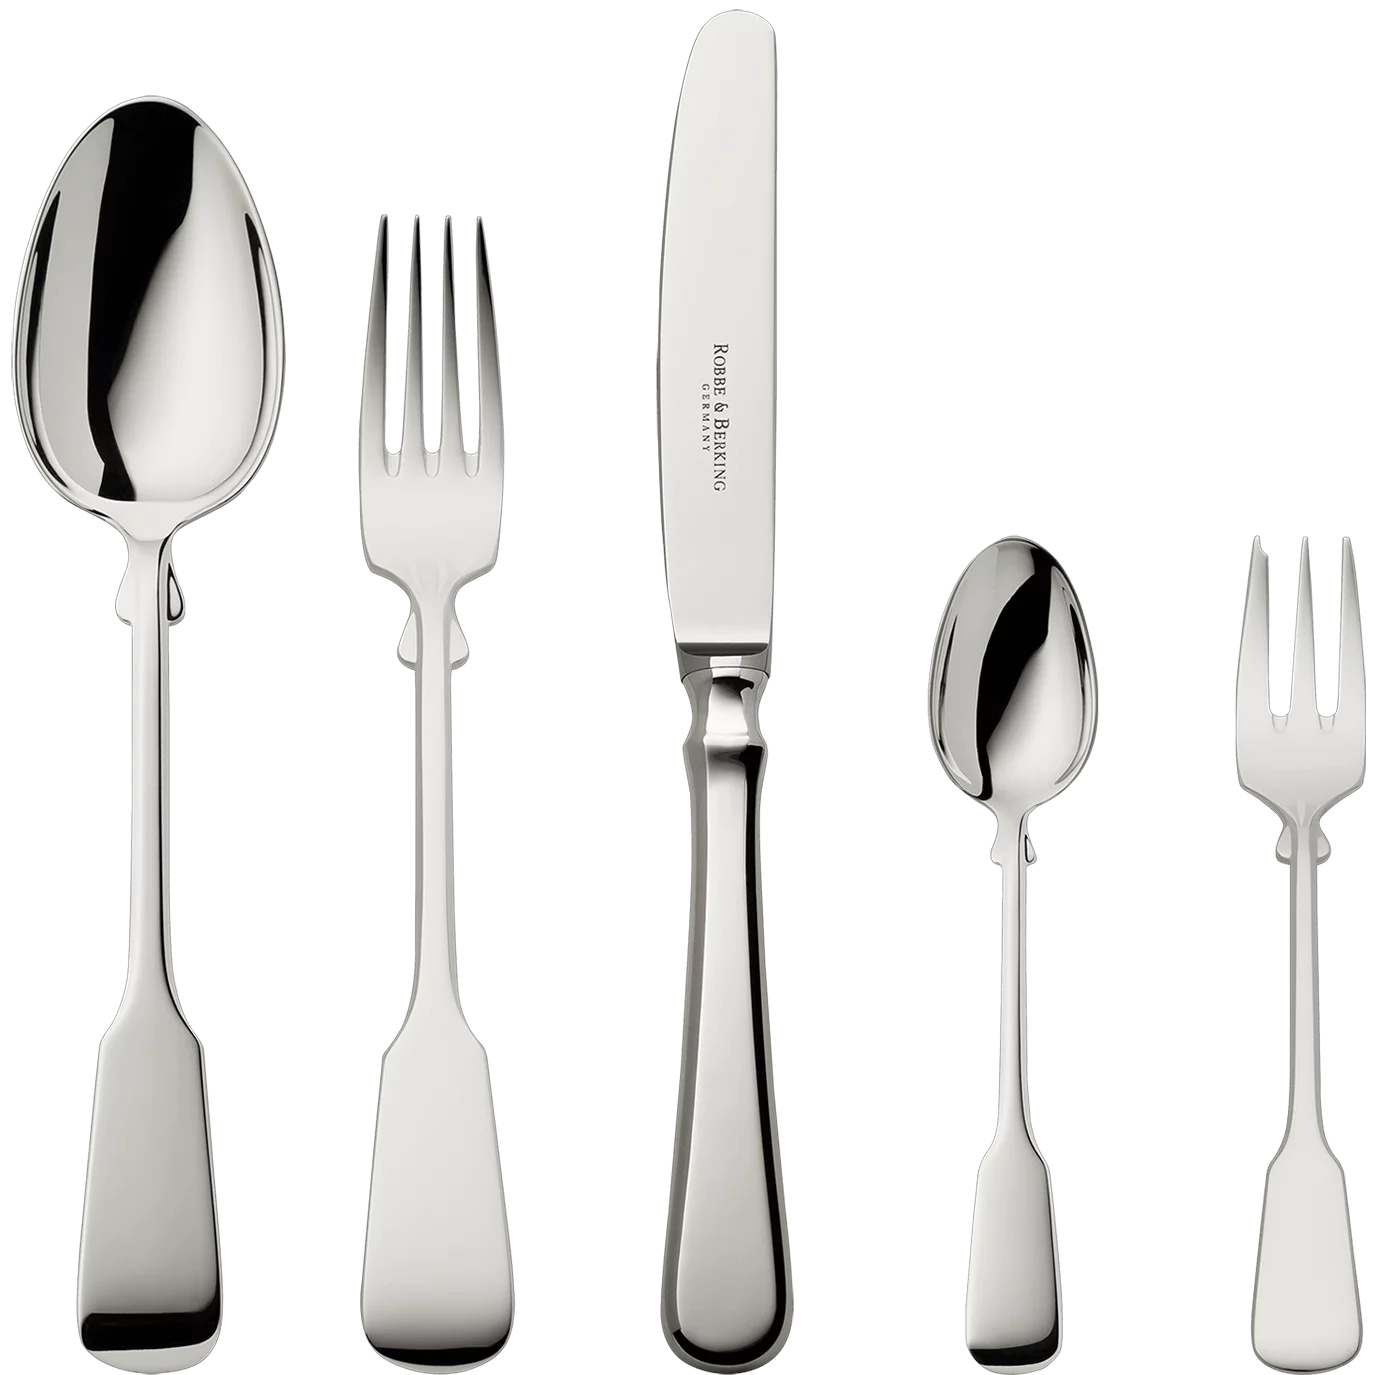 Spaten 5-piece place setting (925 Sterling Silver)